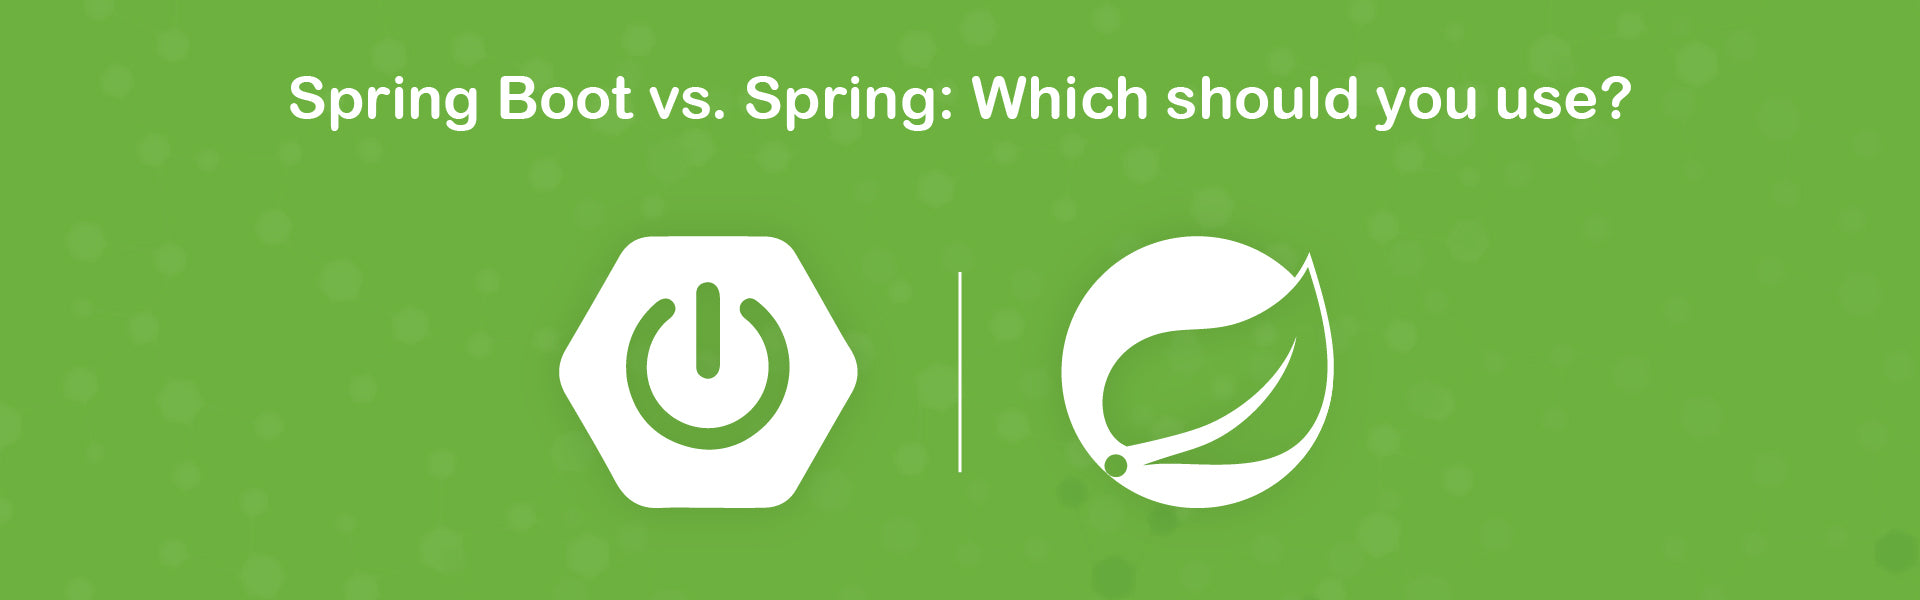 Spring Boot vs. Spring: Which should you use?